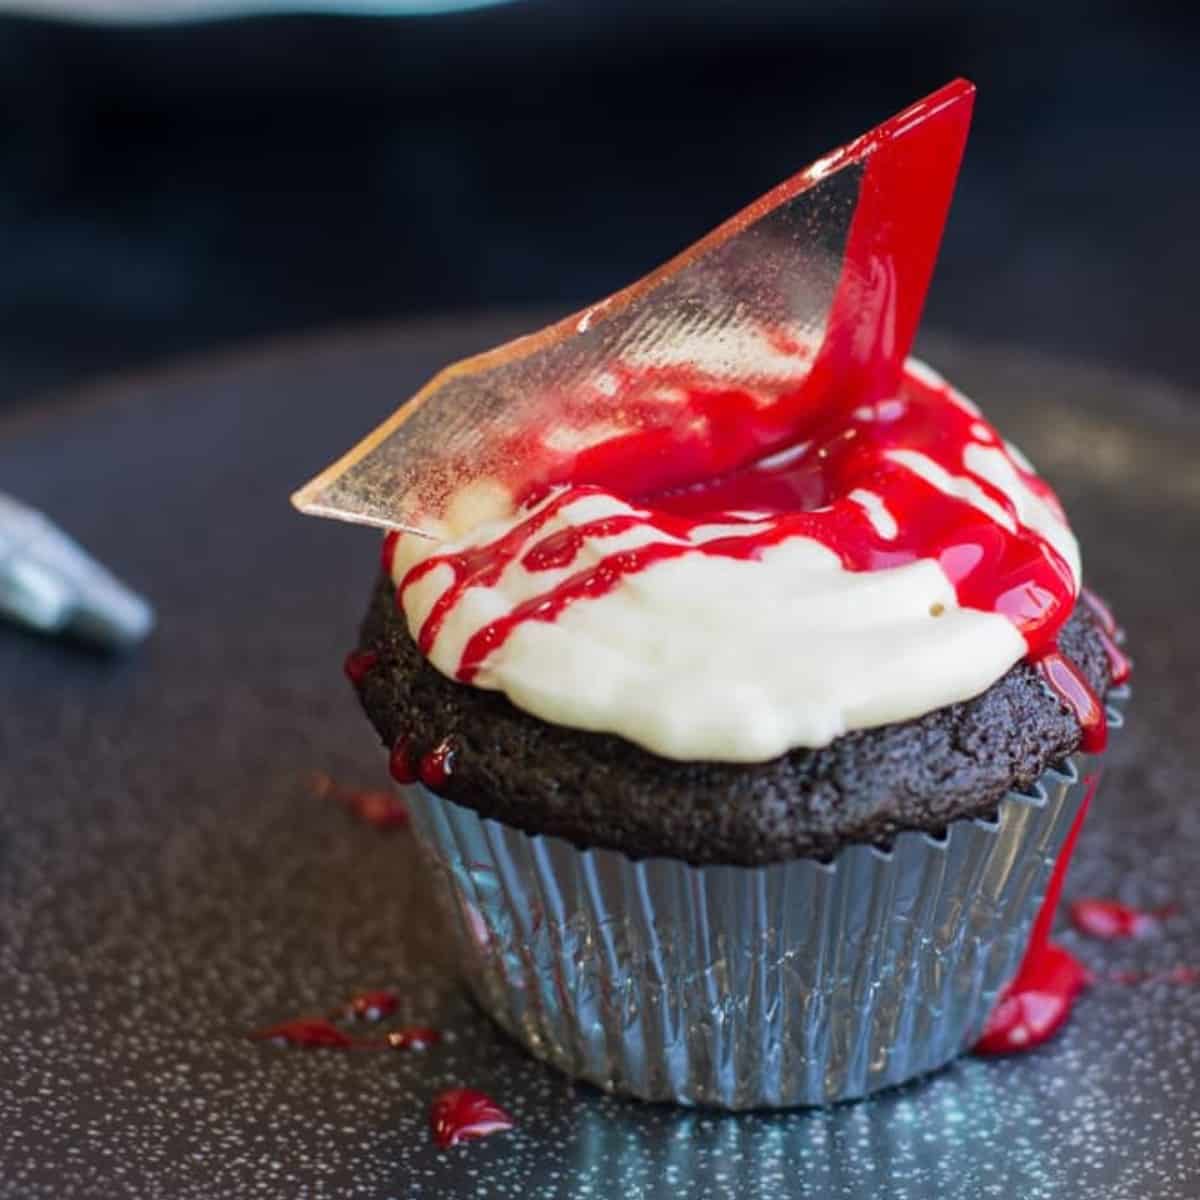 halloween cupcakes with edible blood and edible sugar glass shards